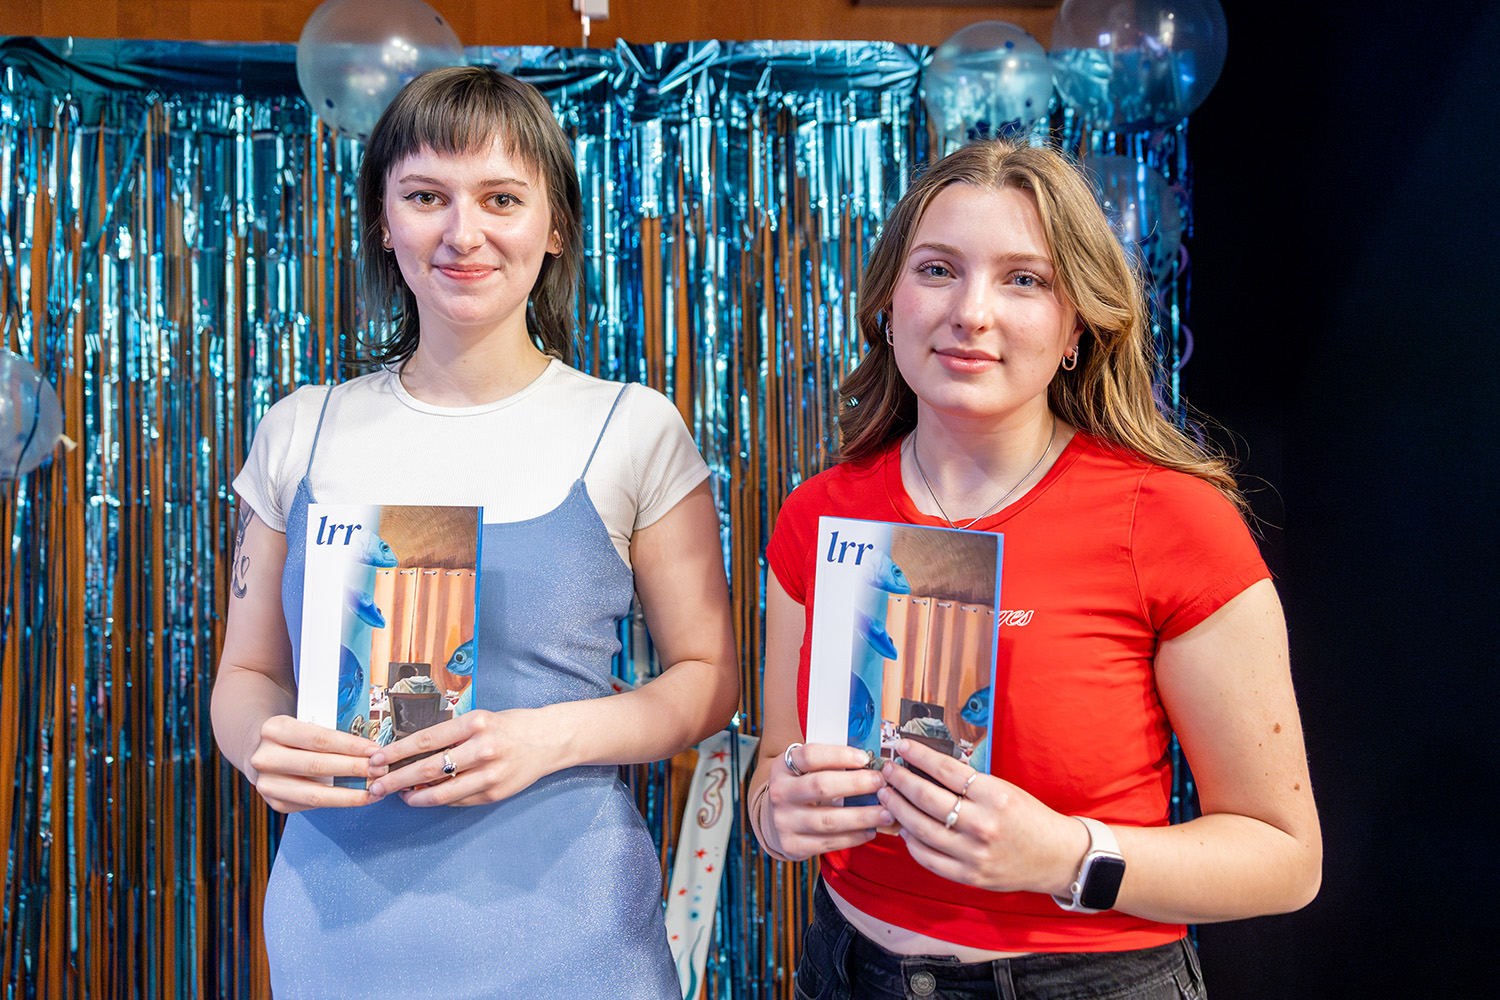 Two students pose holding copies of a literary magazine.